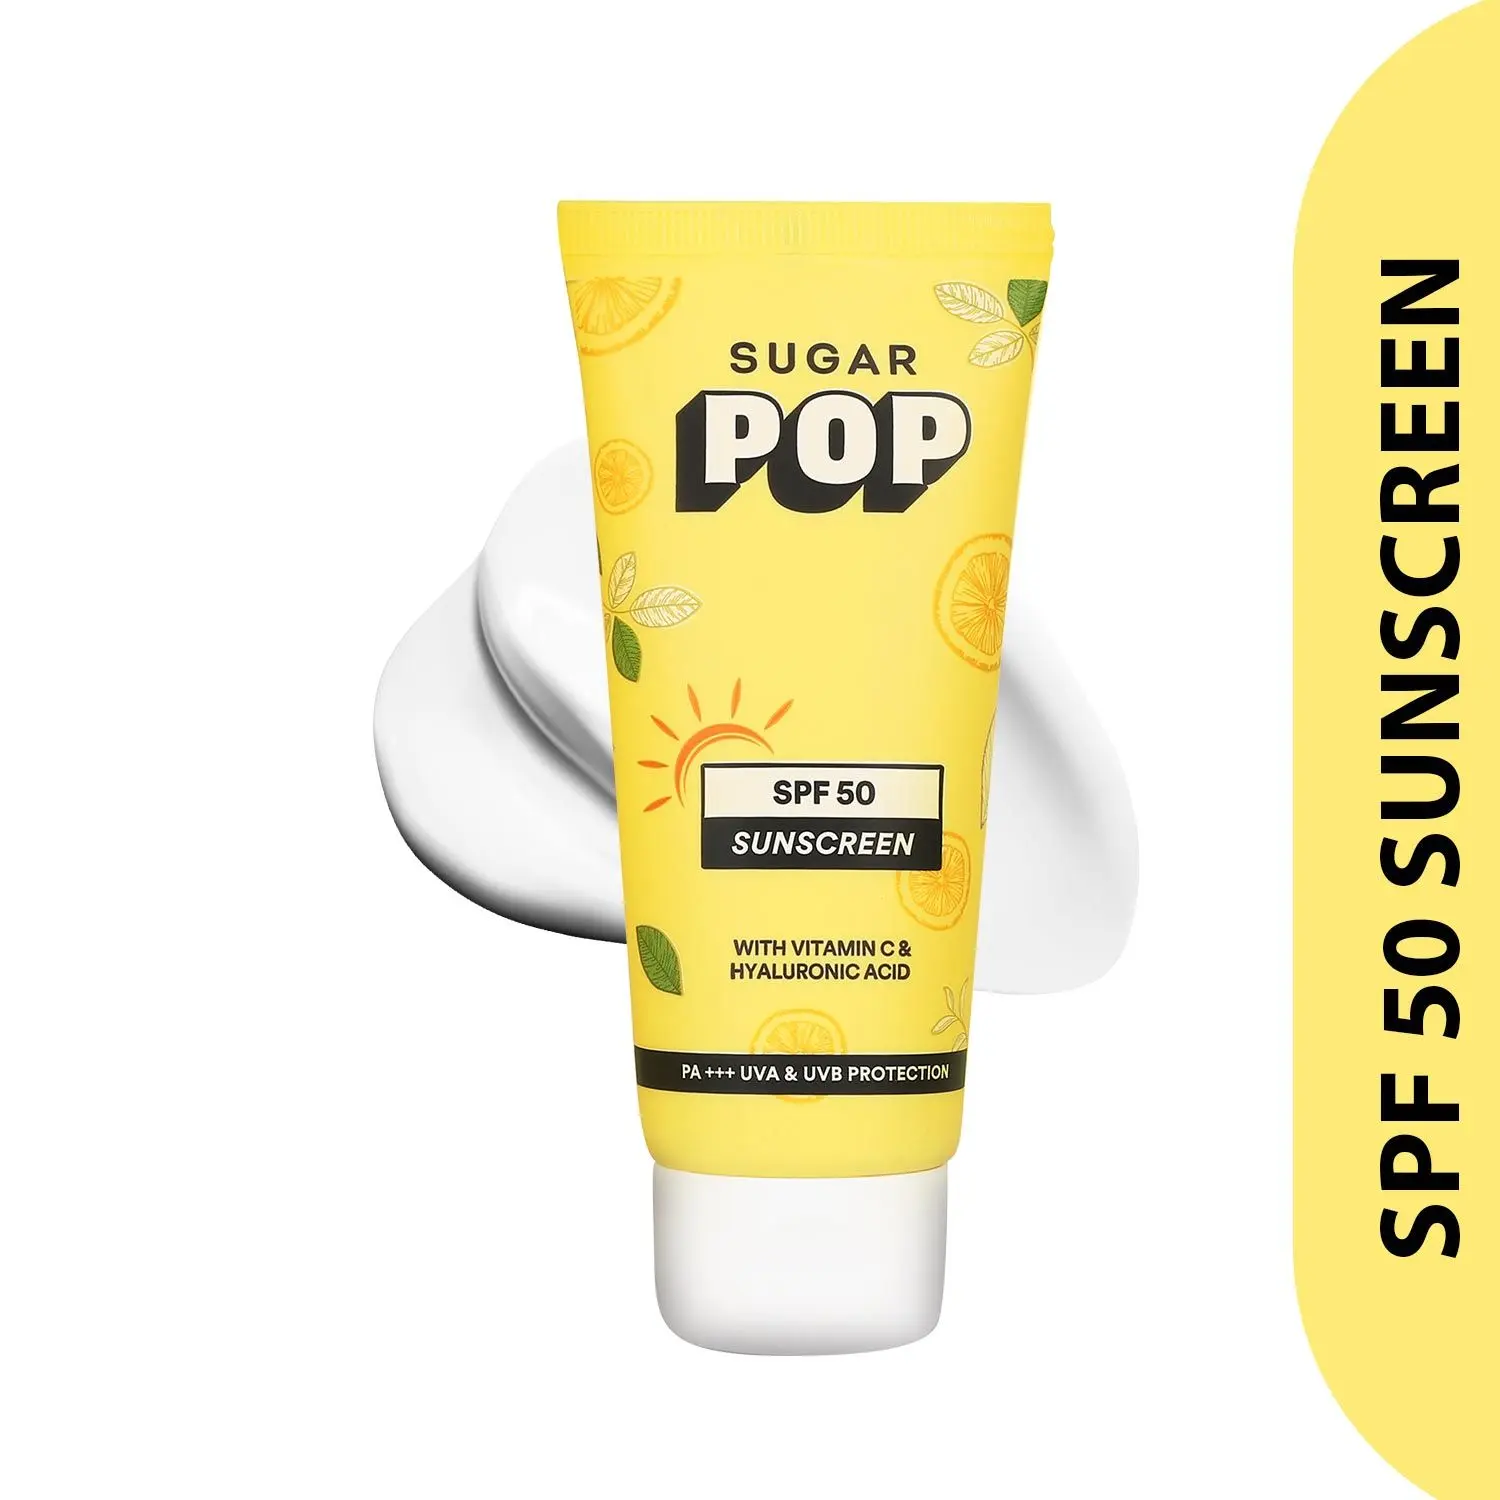 SUGAR POP SPF 50 Sunscreen with PA+++ for UVA, UVB & Blue Light Protection | Vitamin C & Hyaluronic Acid Infused | Non-greasy | No White Cast | For All Skin Types | 50 gms